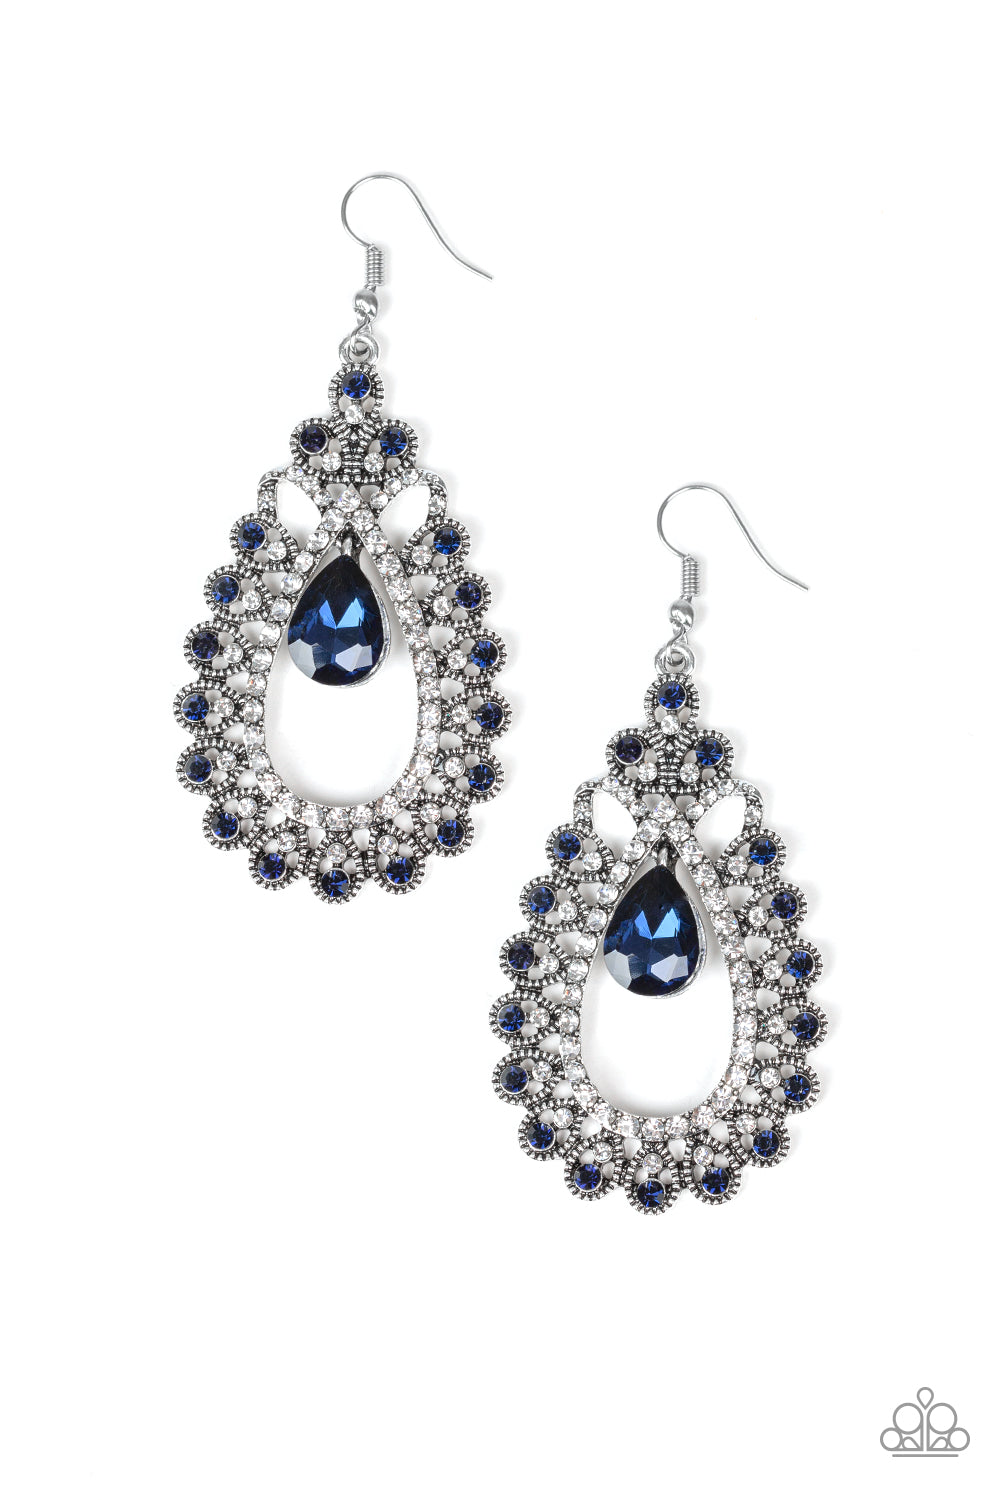 All About Business - blue - Paparazzi earrings